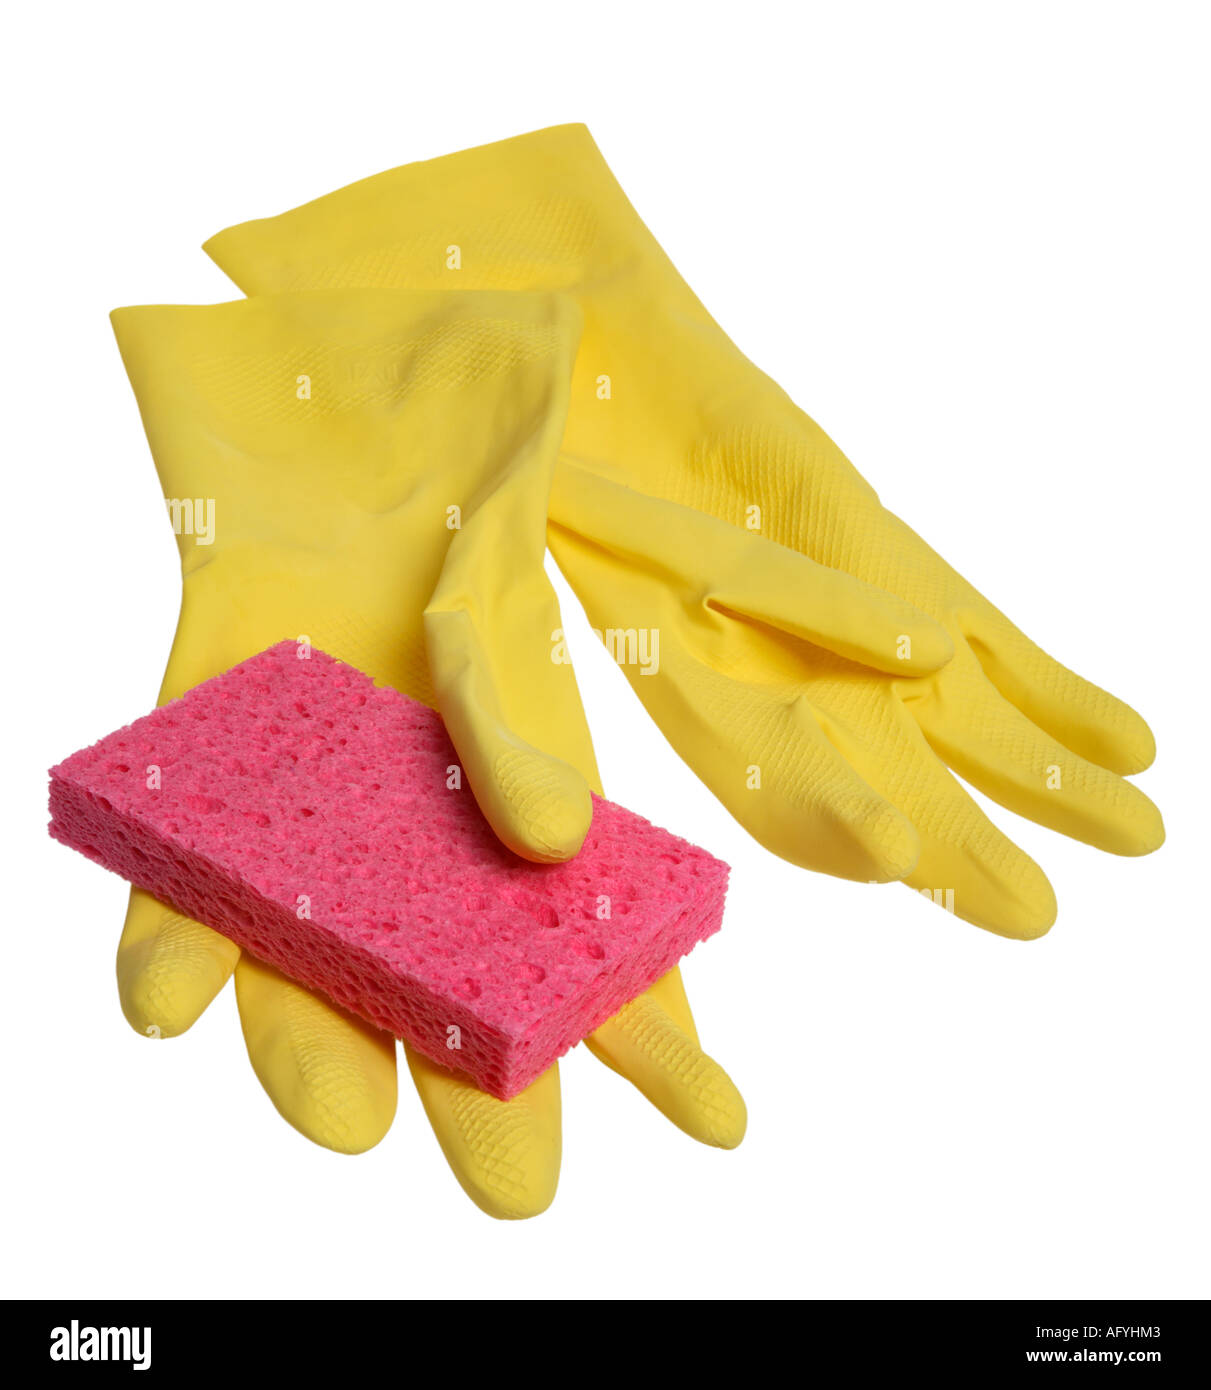 Rubber Gloves and Sponge, Cleaning Supplies Stock Photo